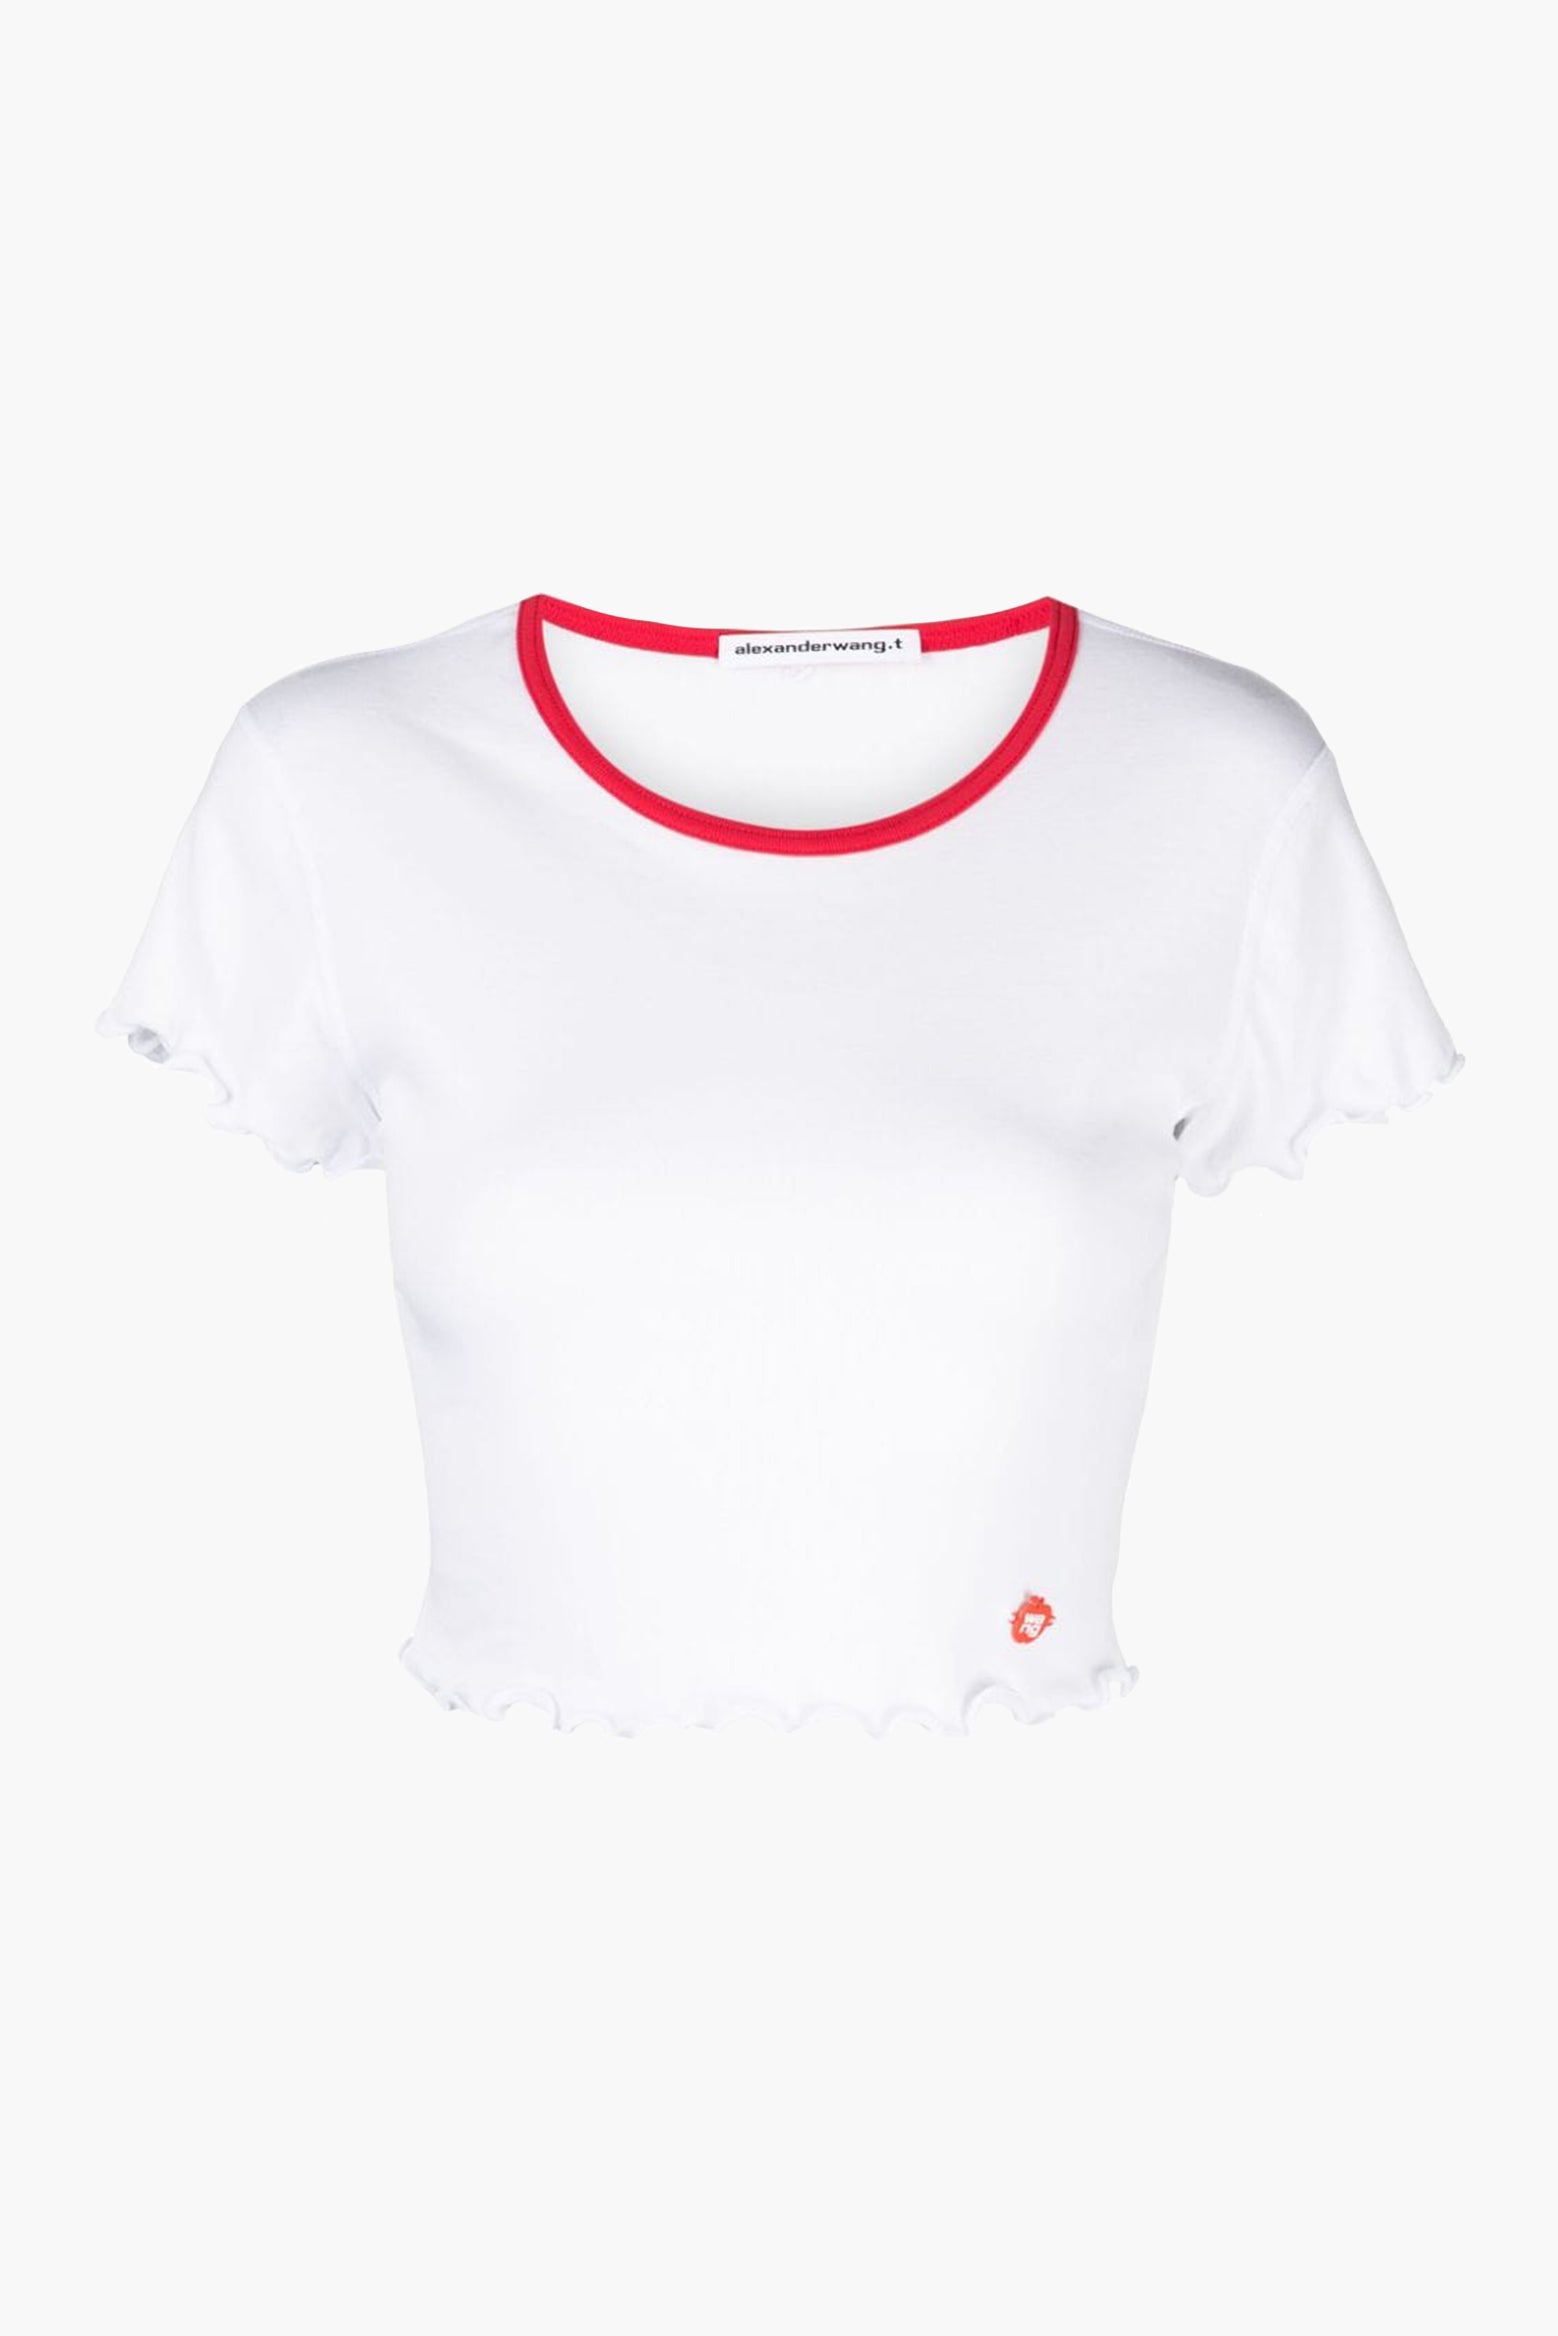 Alexander Wang Lettuce Hem Crew Neck Baby Tee in White available at The New Trend Australia